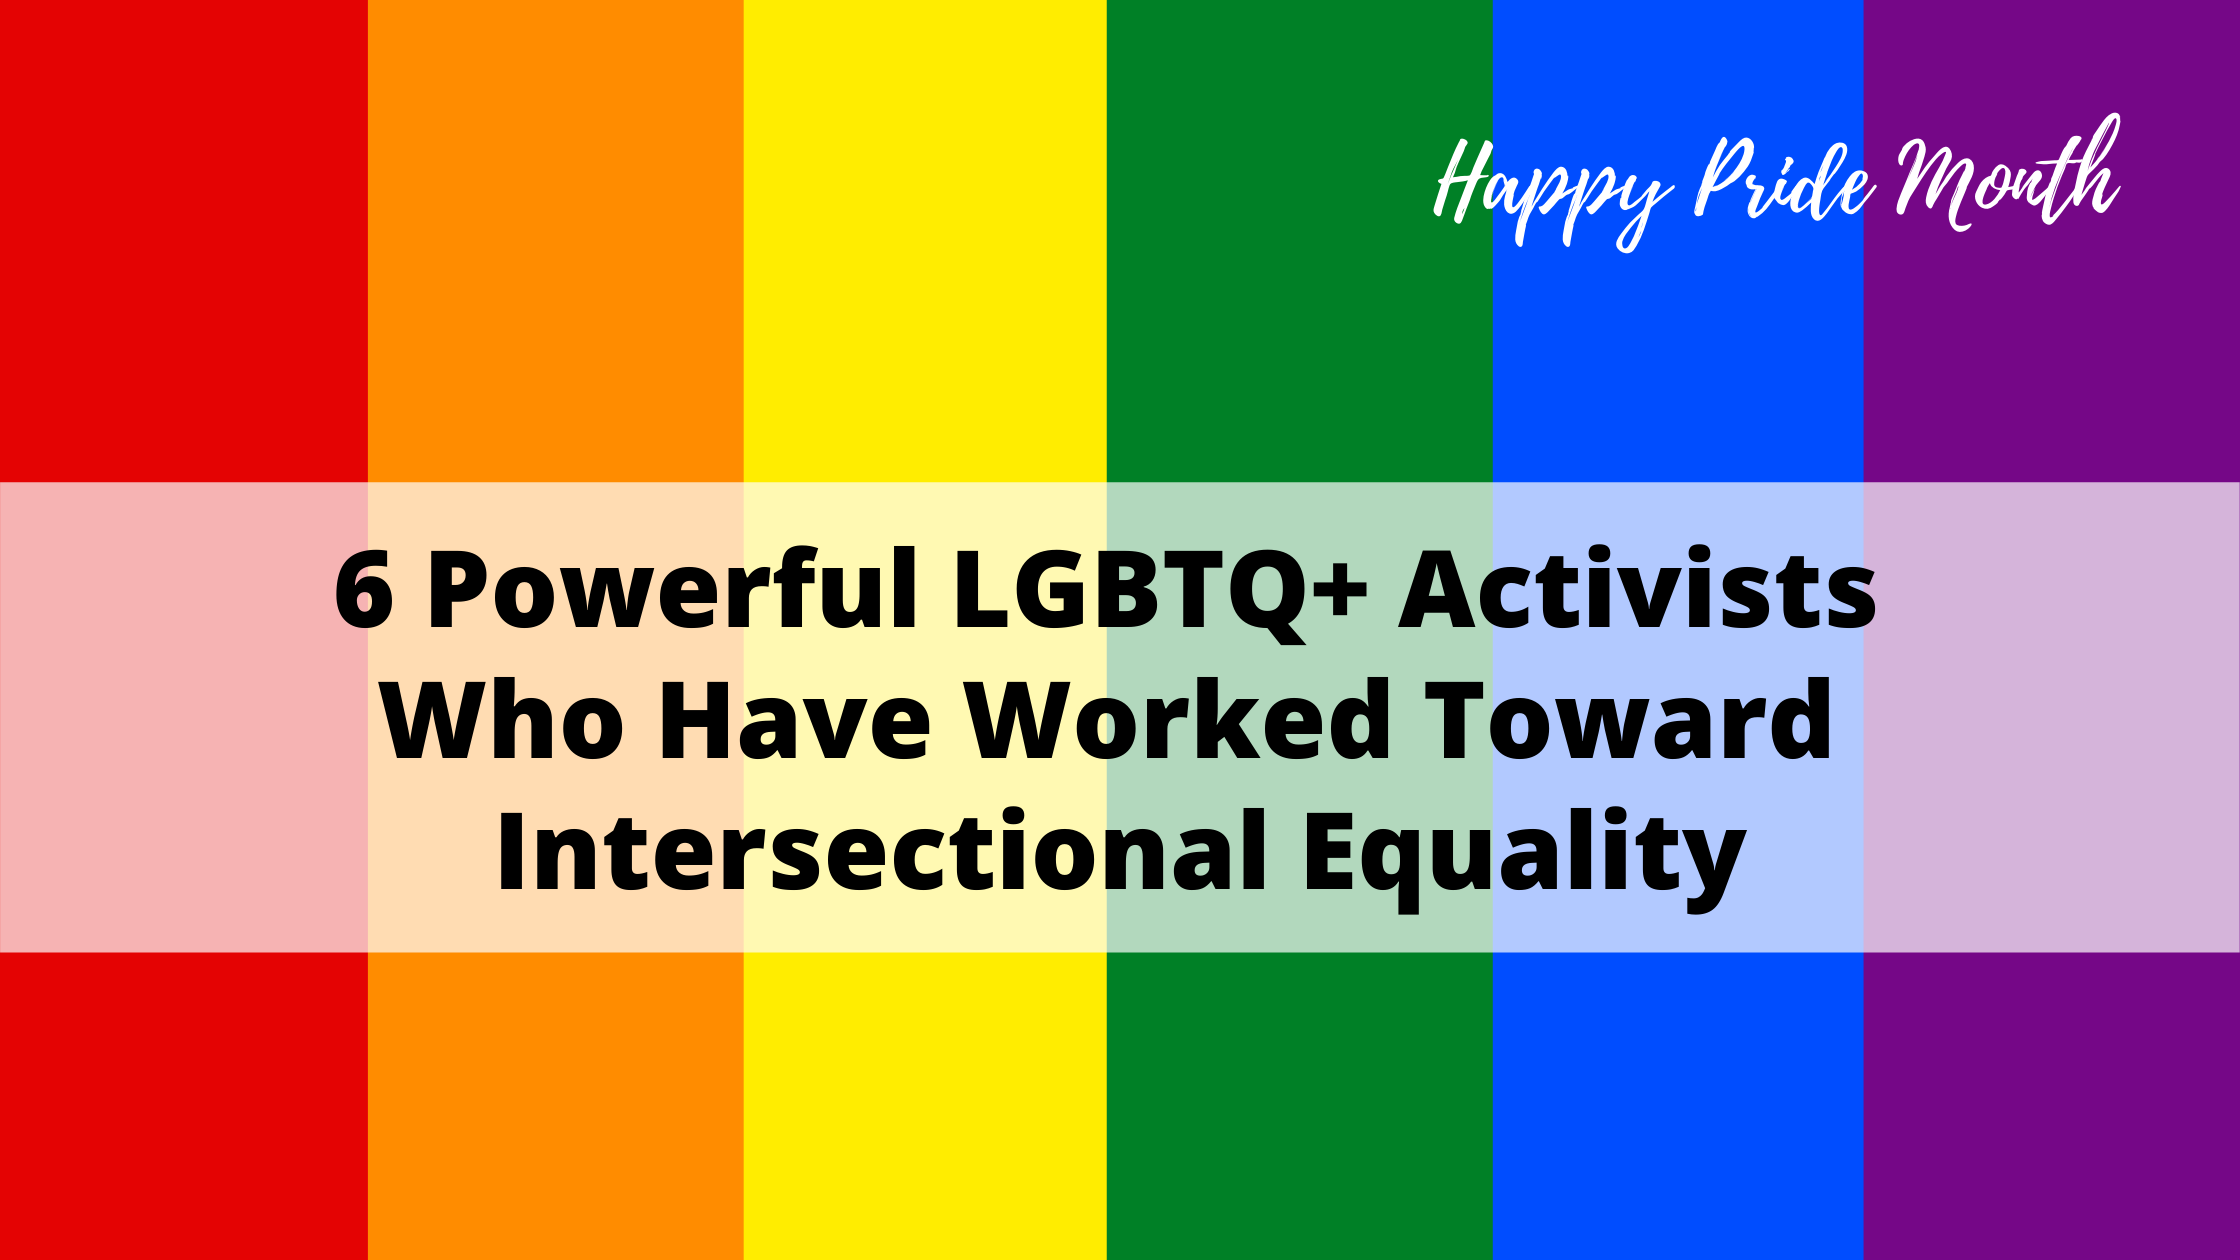 6 Powerful LGBTQ+ Activists Who Have Worked Toward Intersectional Equality